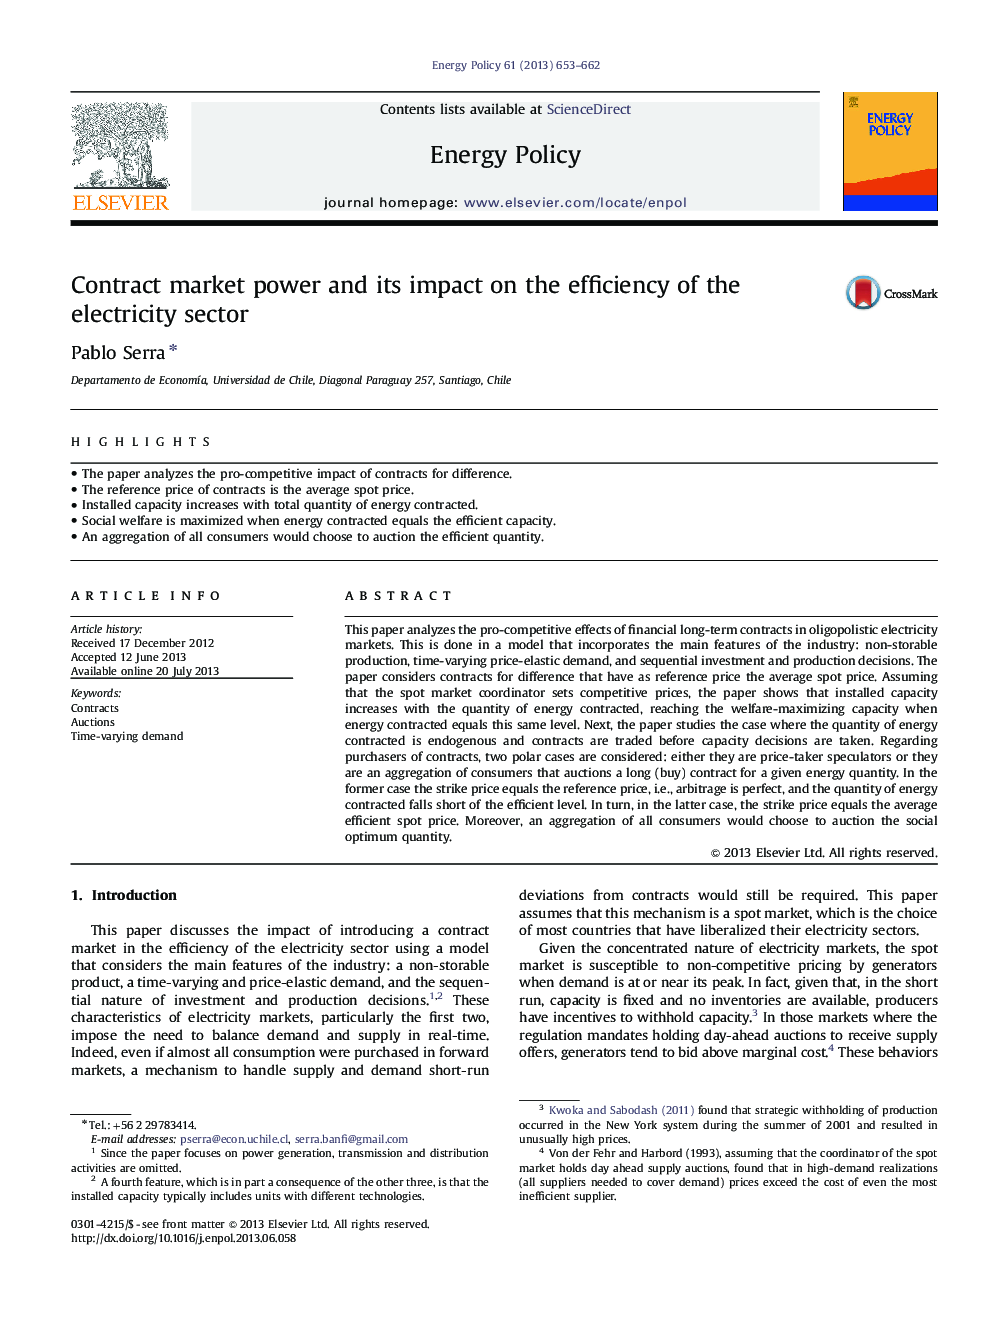 Contract market power and its impact on the efficiency of the electricity sector